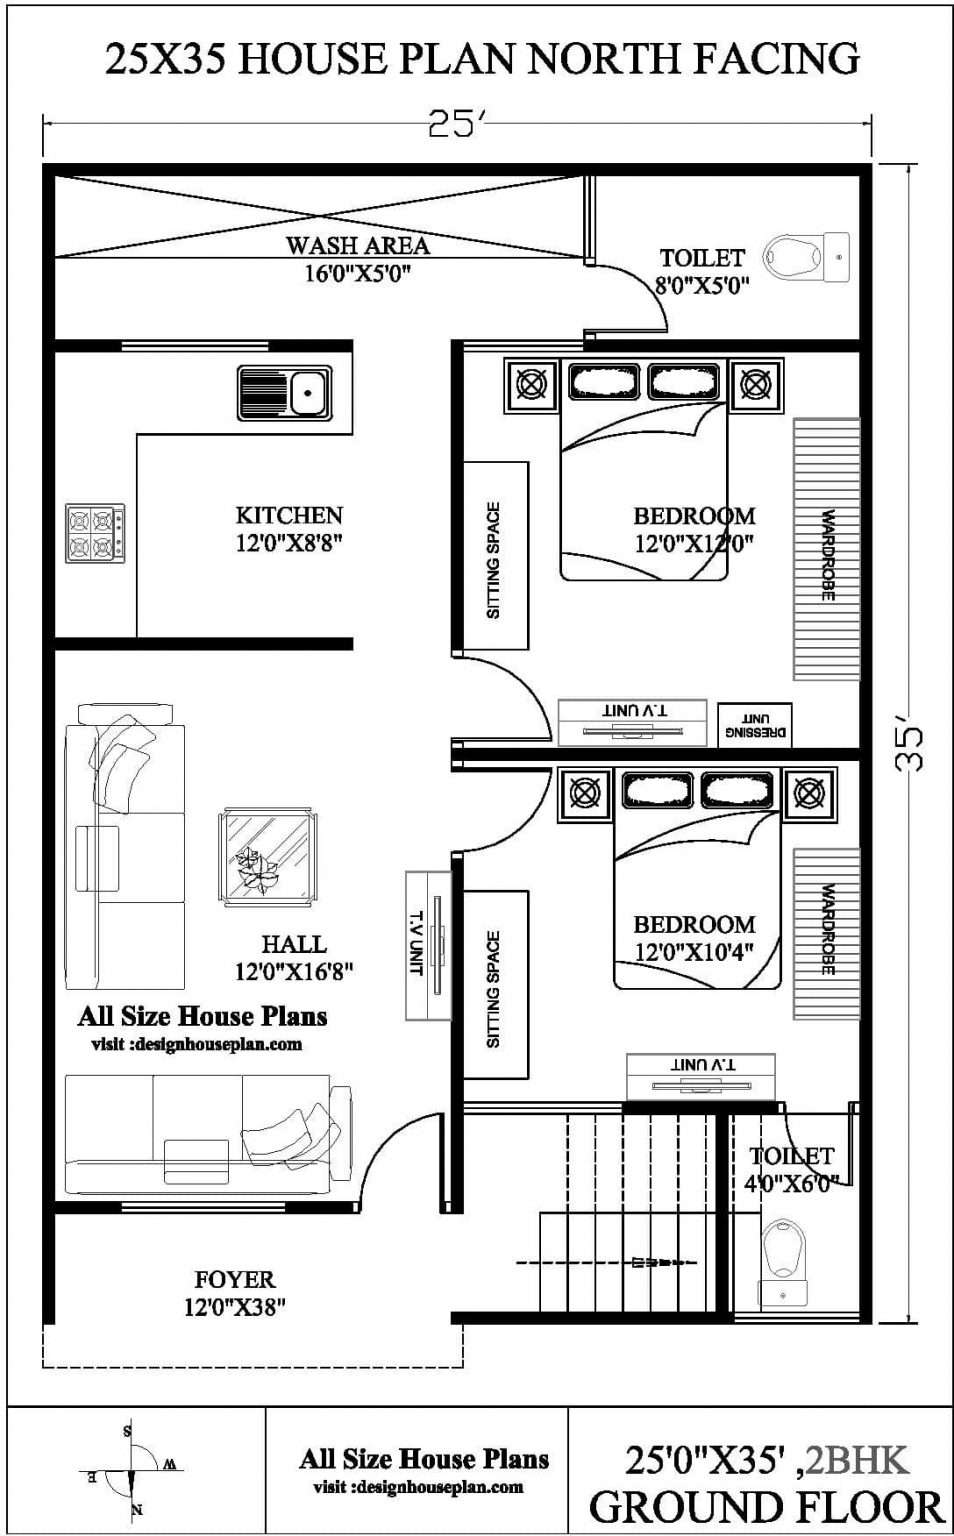 25 * 35 house plan east facing | 25x35 house plan north facing | Best 2bhk